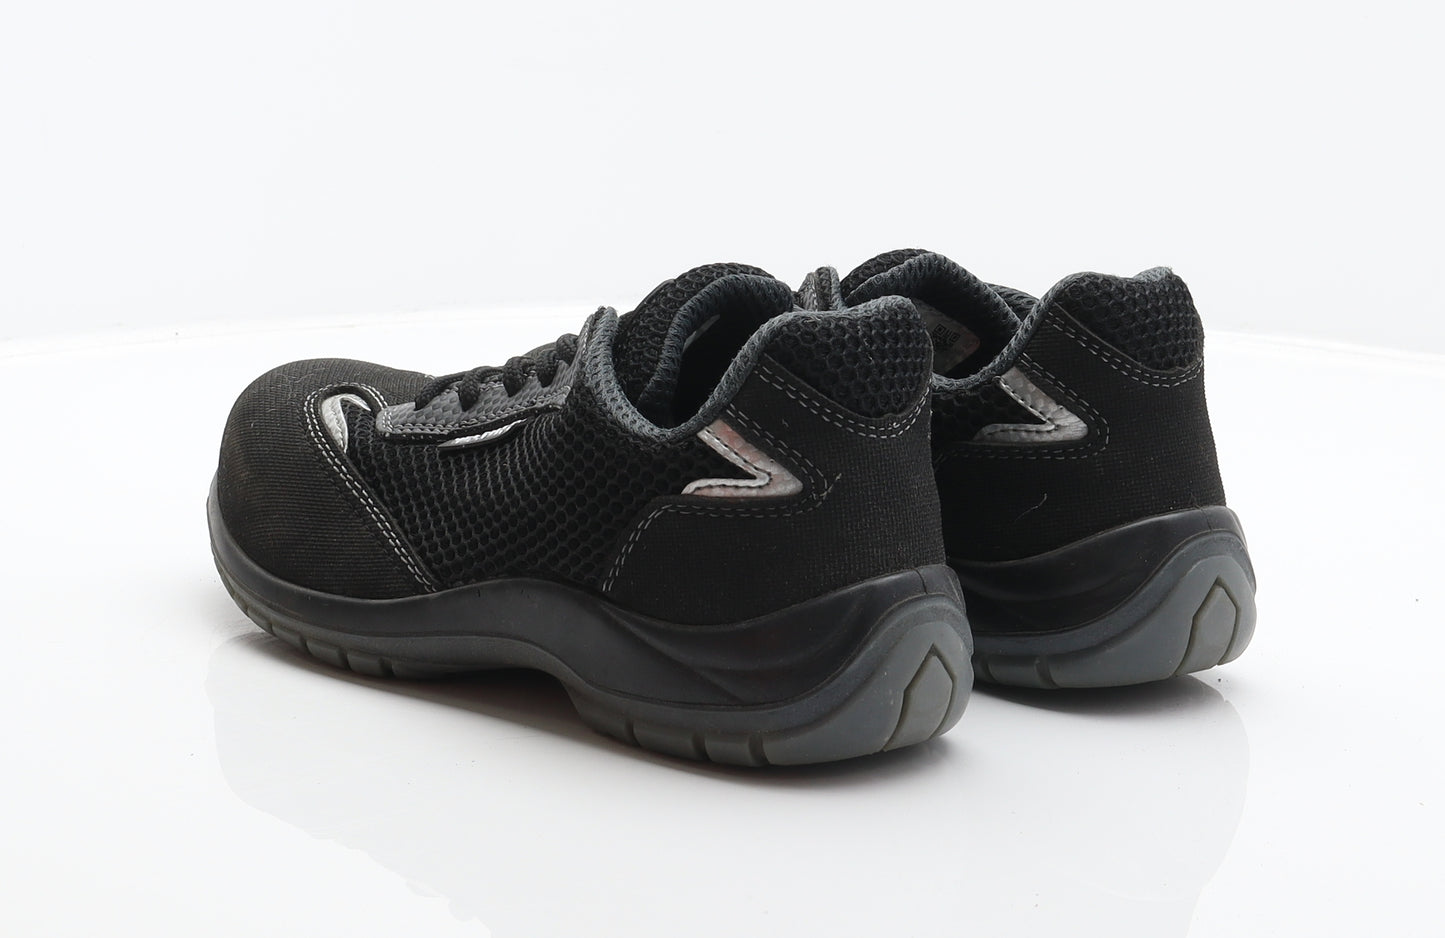 Veltuff Womens Black Synthetic Trainer UK 3 36 - Safety footwear, Oil resistant, Antistatic, Antislip